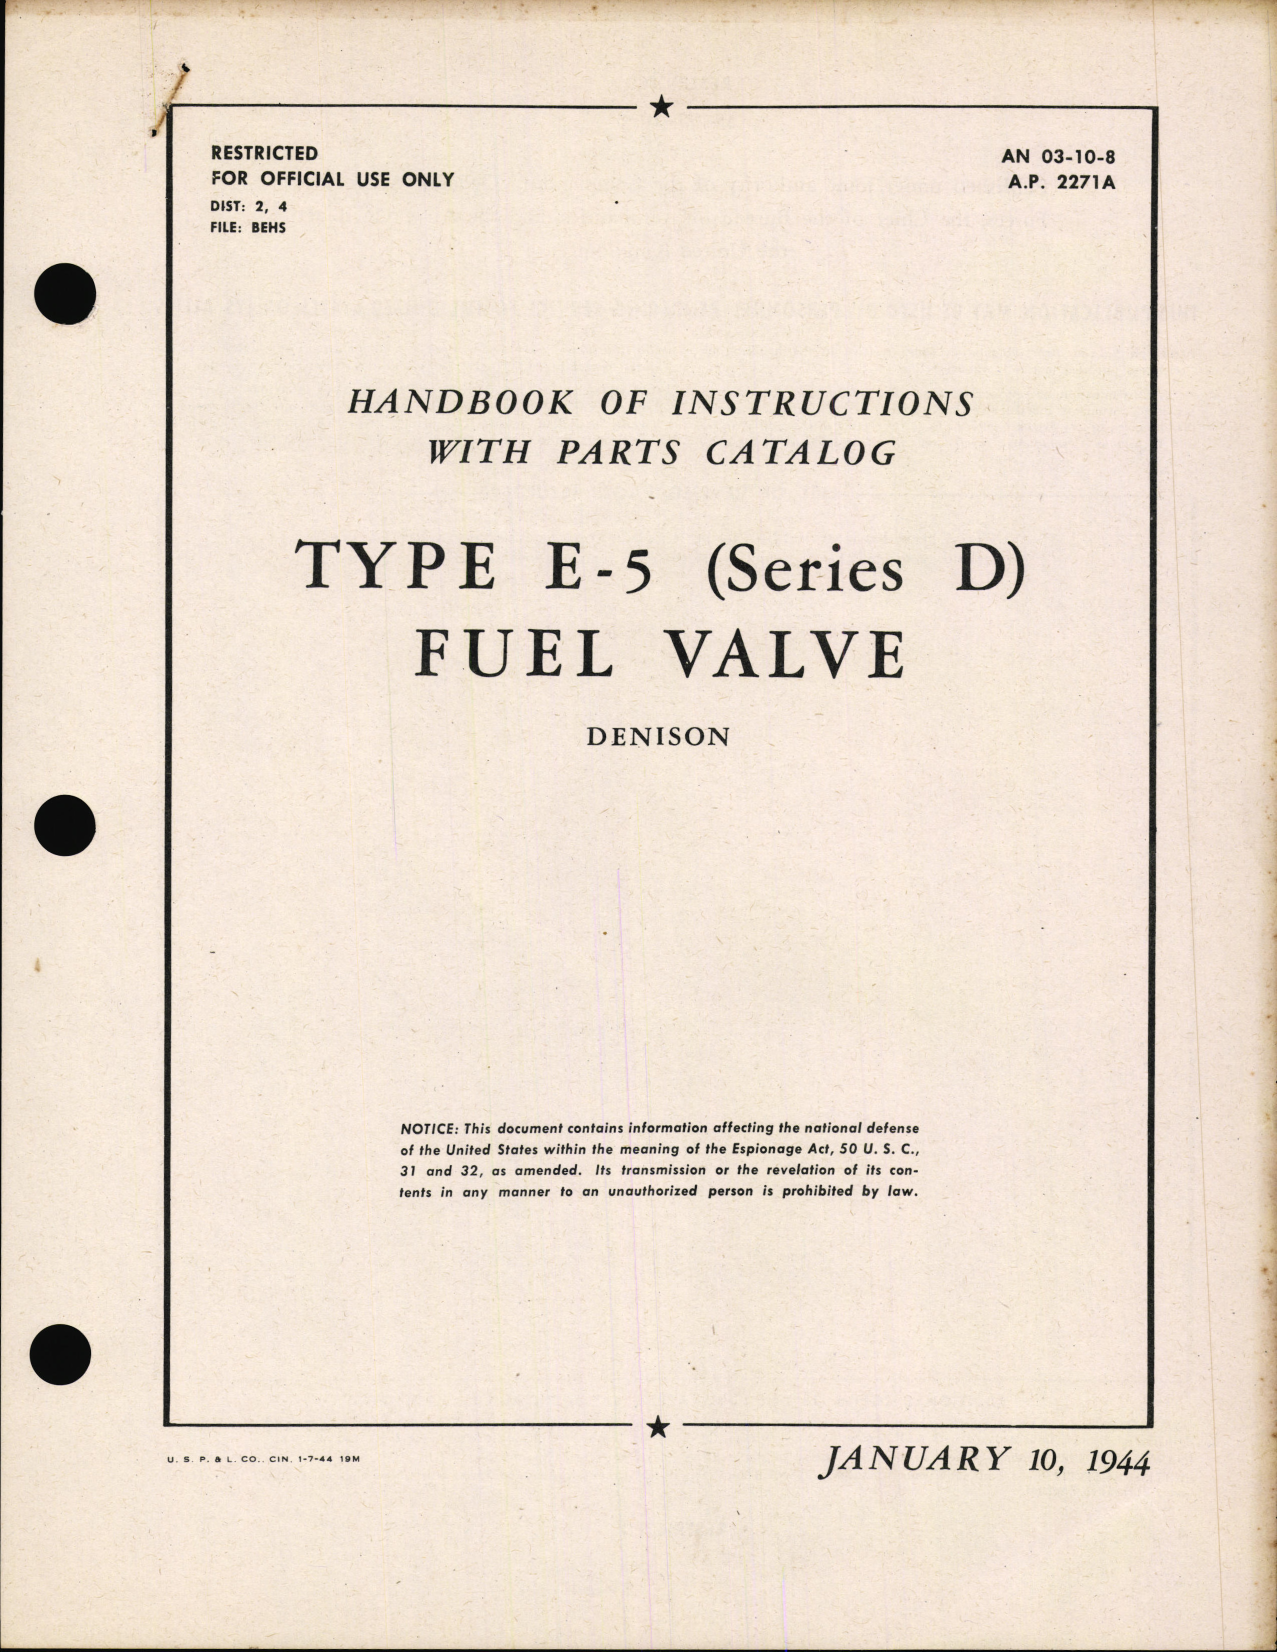 Sample page 1 from AirCorps Library document: Handbook of Instructions with Parts Catalog for Type E-5 (Series D) Fuel Valve